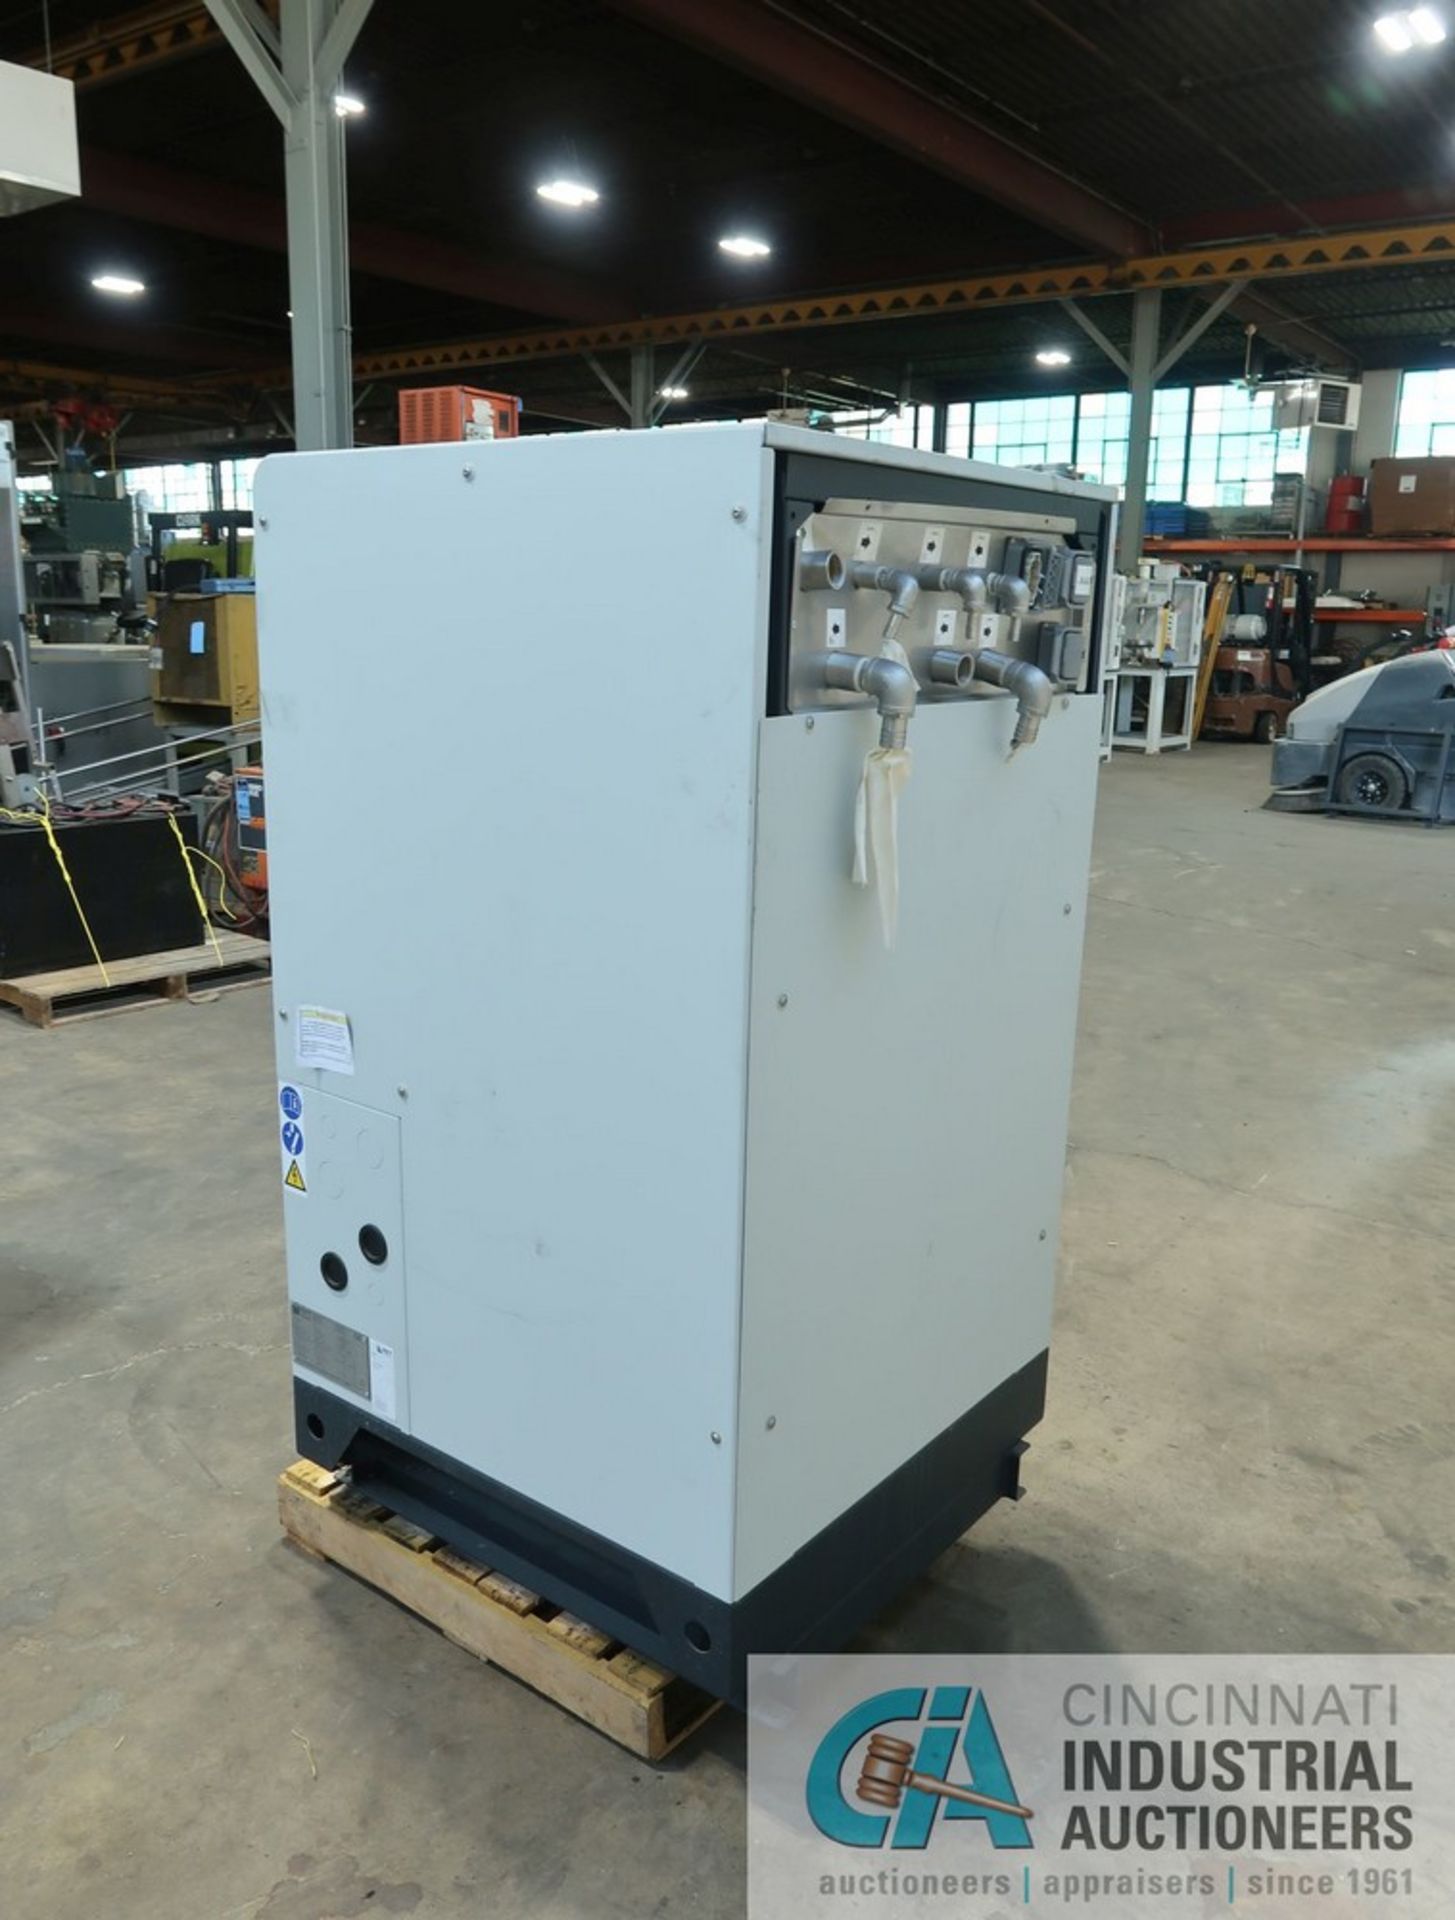 2017 KKT CHILLERS MODEL VBOX X6 VARIO-LINE CHILLER - Appears to be New, Never put in service; S/N - Image 3 of 6